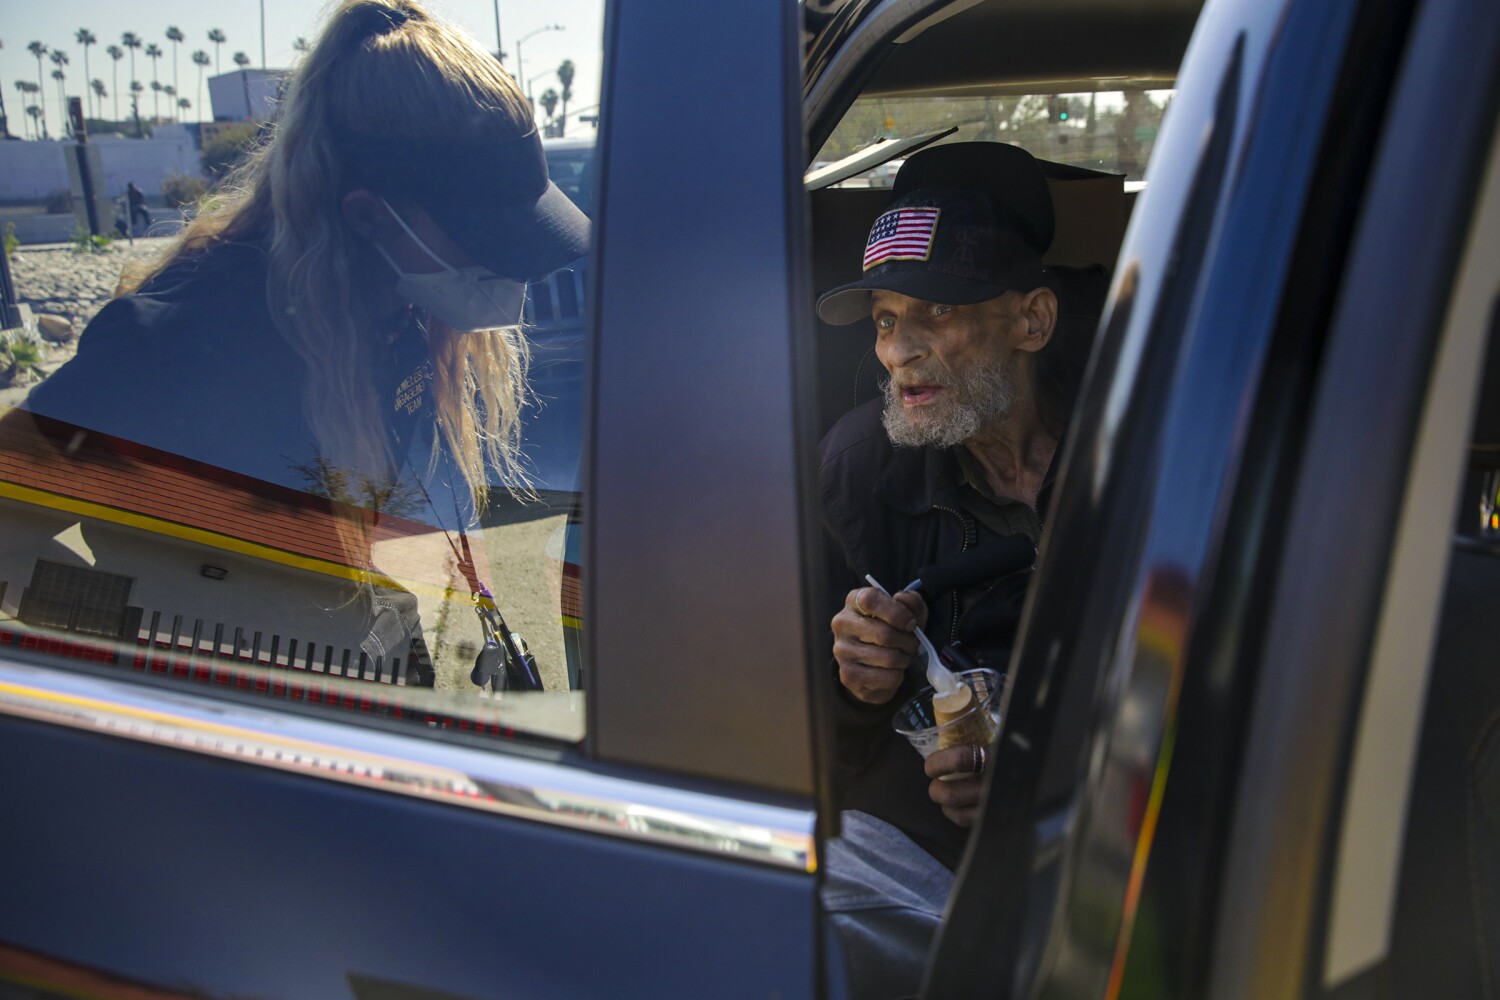 Many homeless people resist group shelters even as L.A. mayoral candidates push to build more